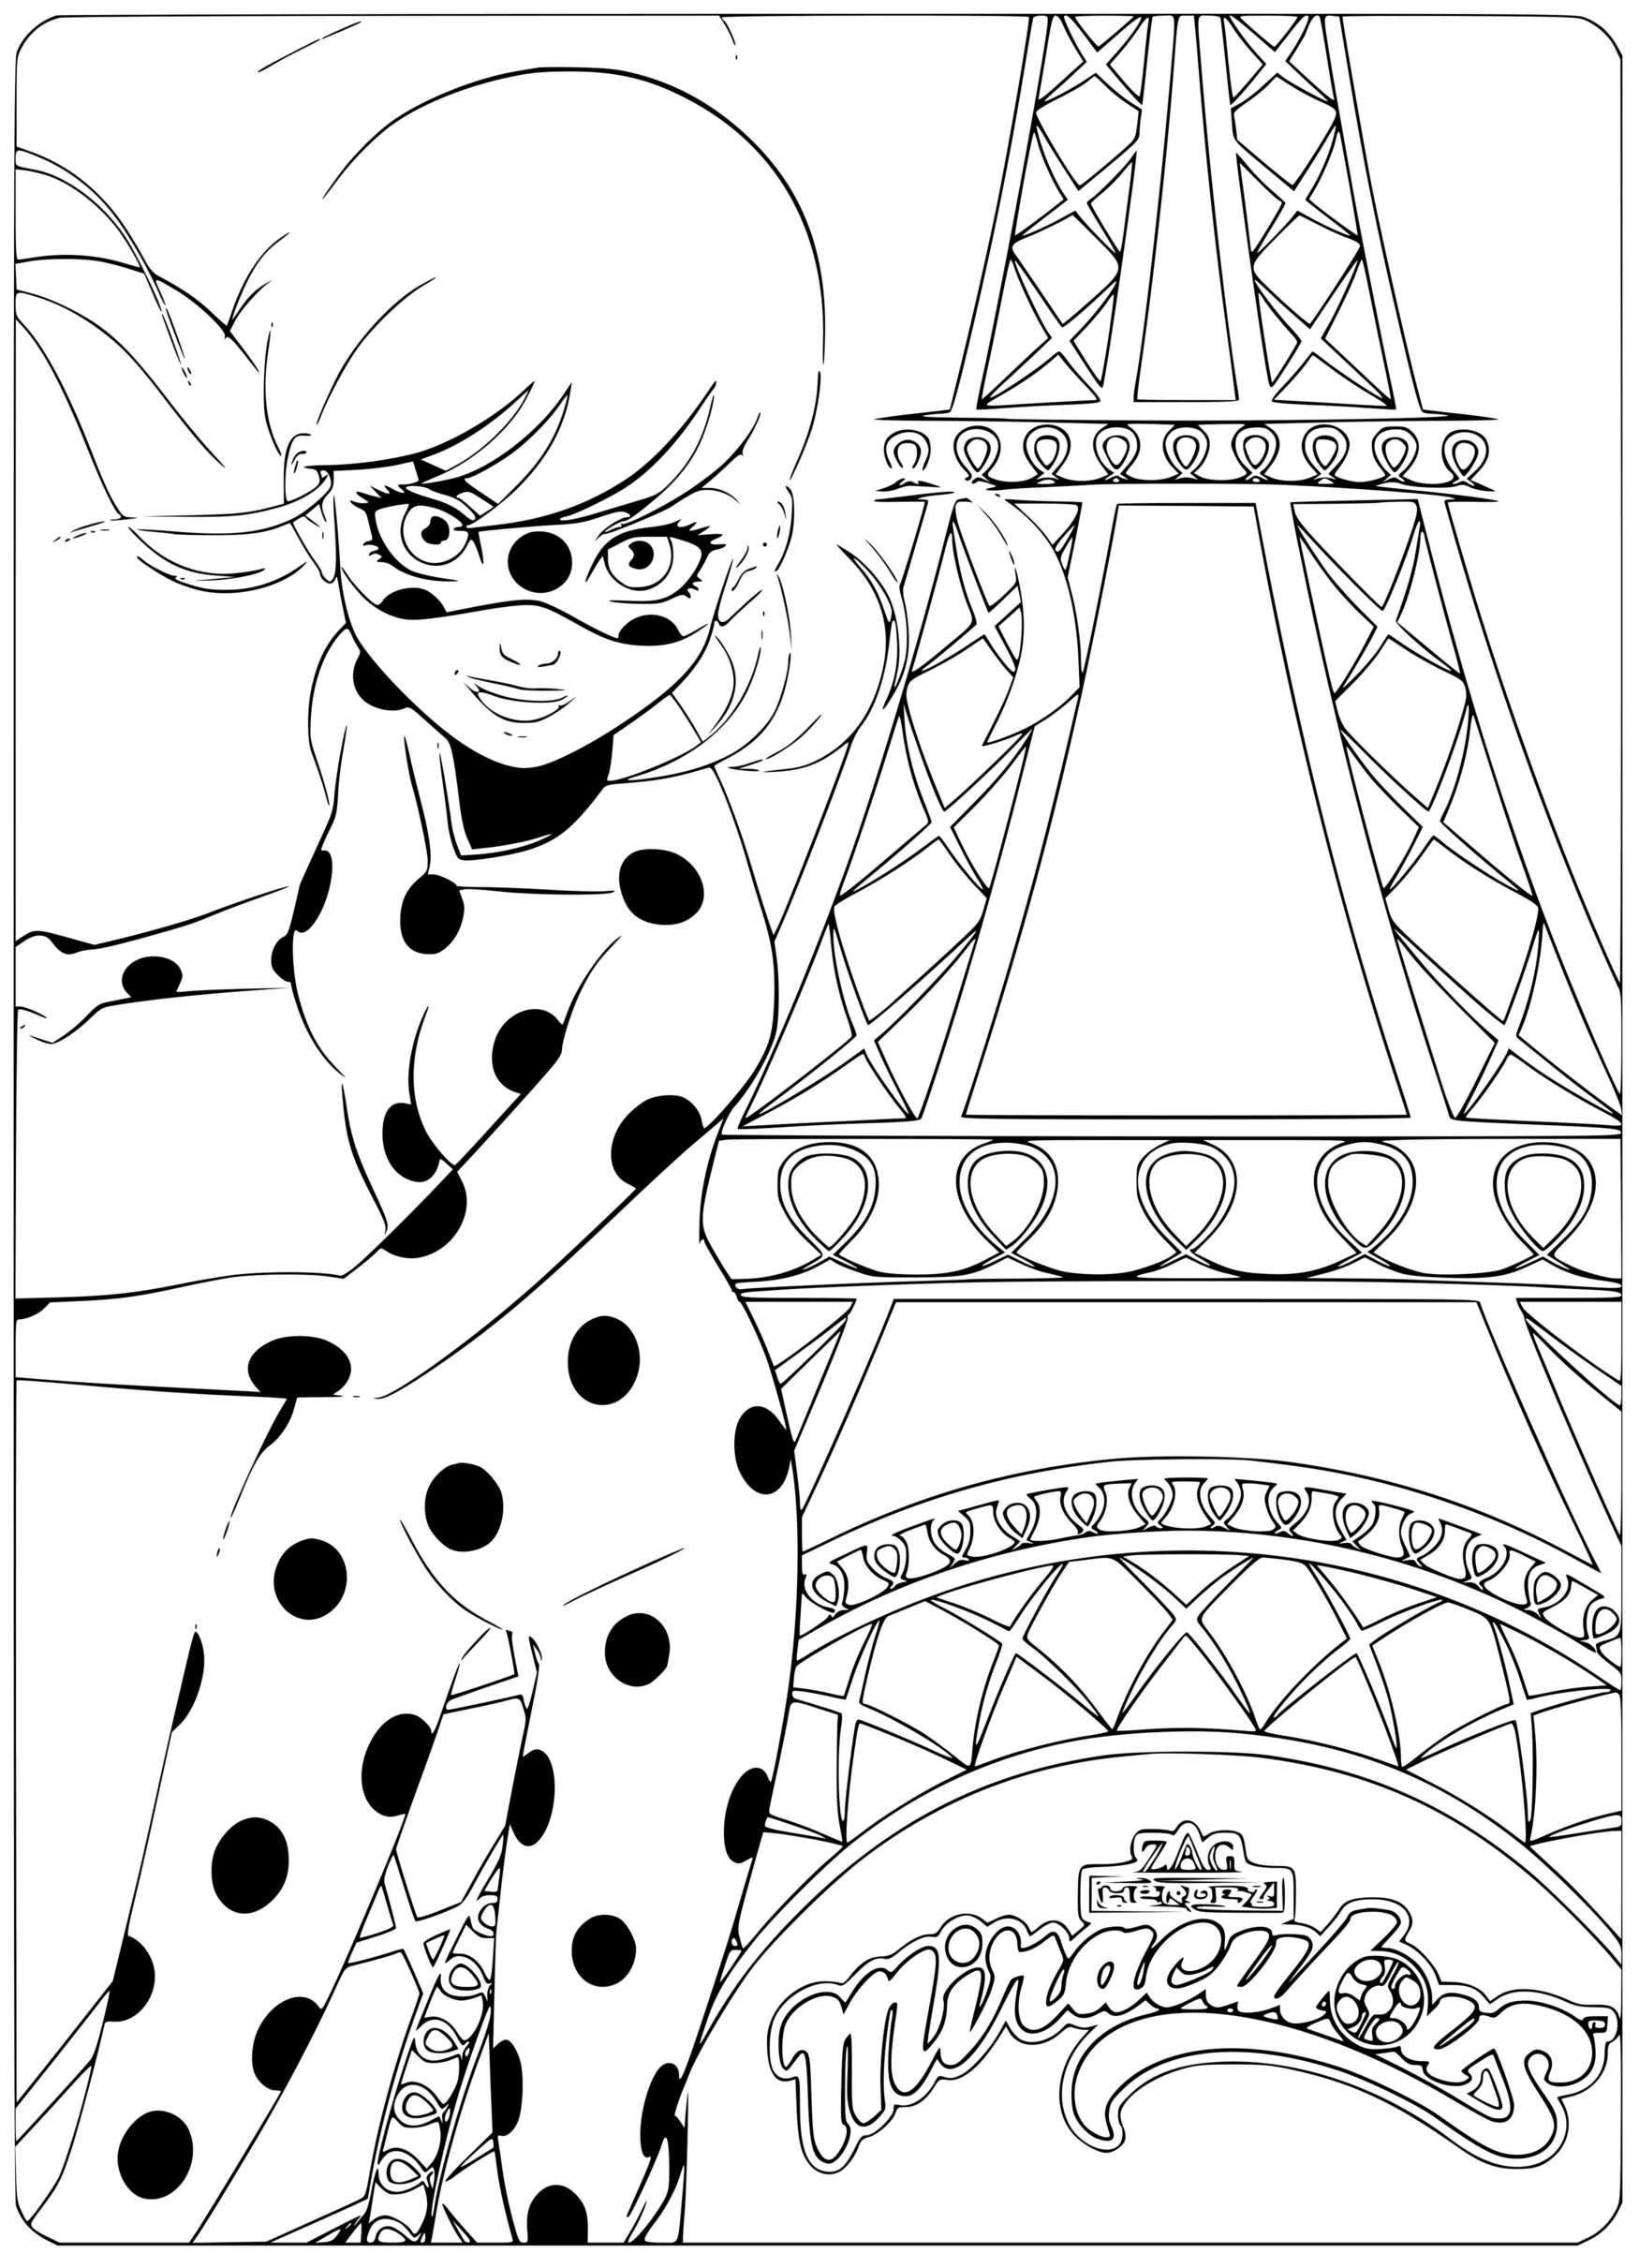 4700 Collection Coloring Pages Of Ladybug And Cat Noir  Latest Free